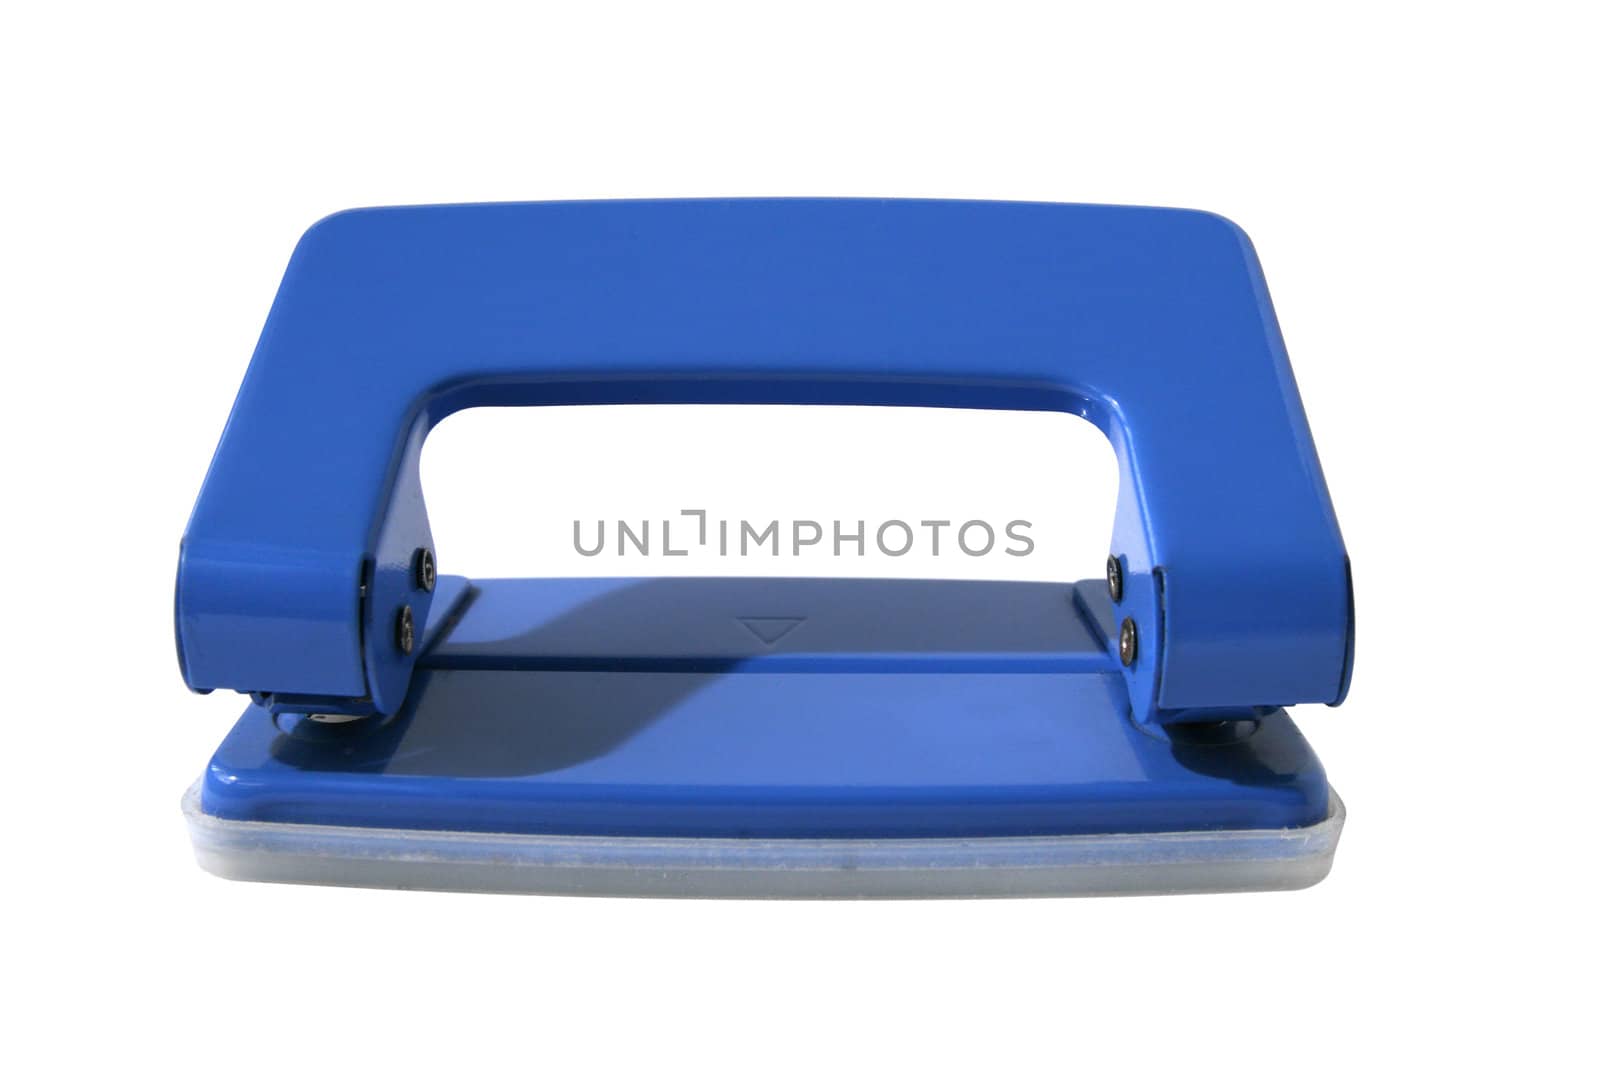 Hole puncher on a white background by daboost